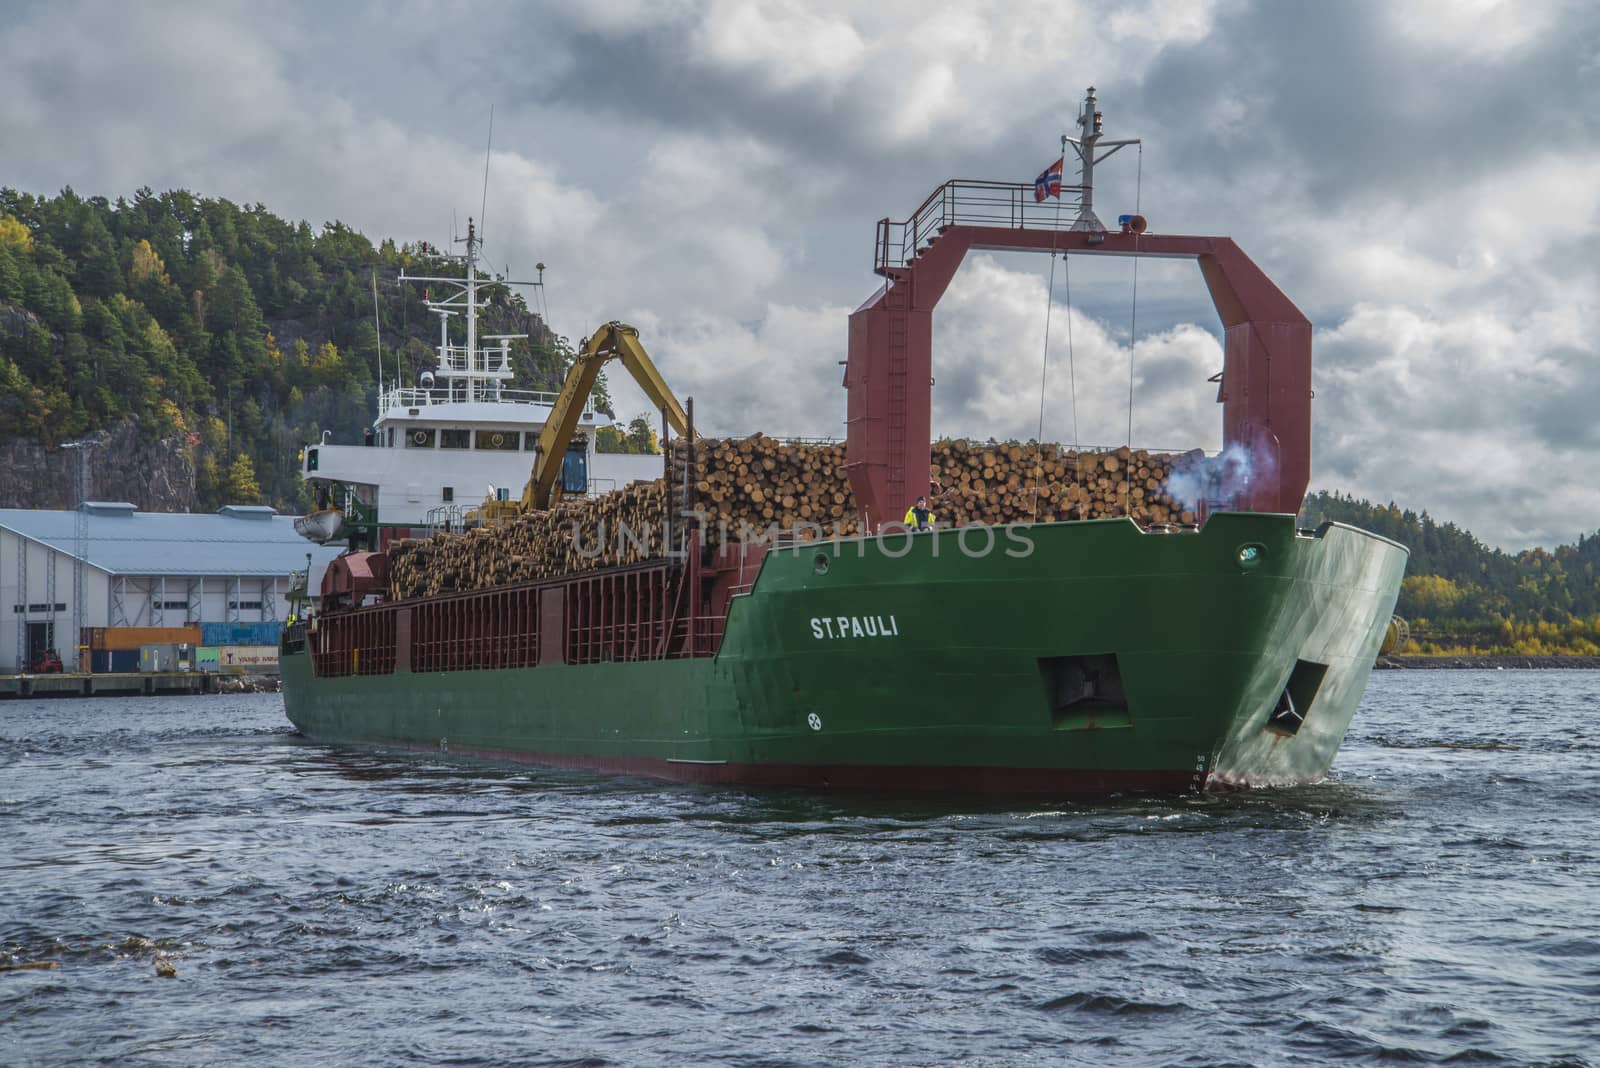 MV St.pauli leaving Halden, (Norway) harbor with a cargo full of timber. Photo is shot 9 October 2013. Vessel's Details: Ship type: General cargo, Year Built: 1983, Length x breadth: 92 m X 15 m, Gross Tonnage: 3075, Dead Weight: 3219 t, Flag: Gibraltar (GI).